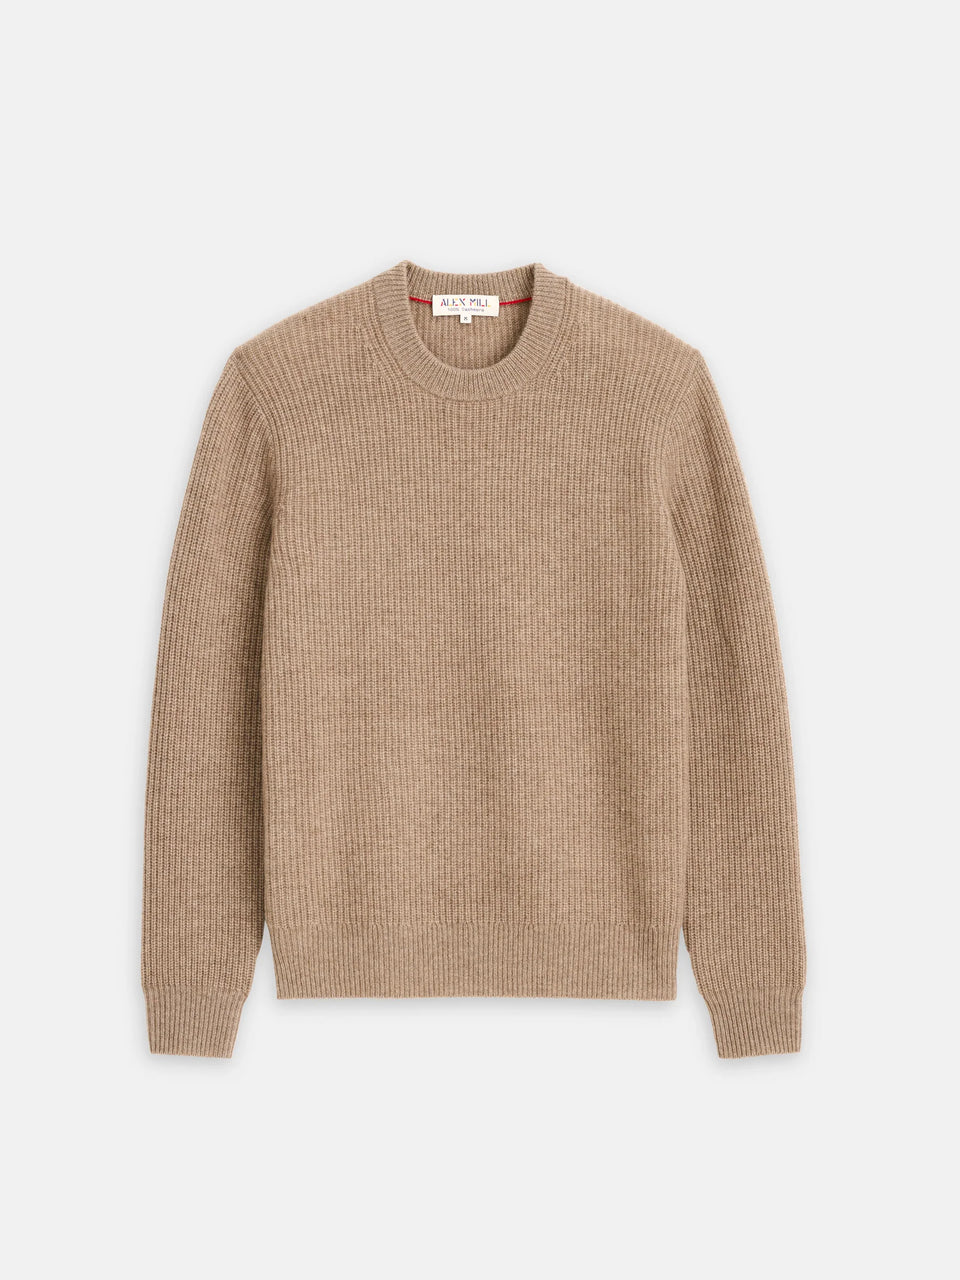 Alex Mill Jordan Sweater in Washed Cashmere - Taupe